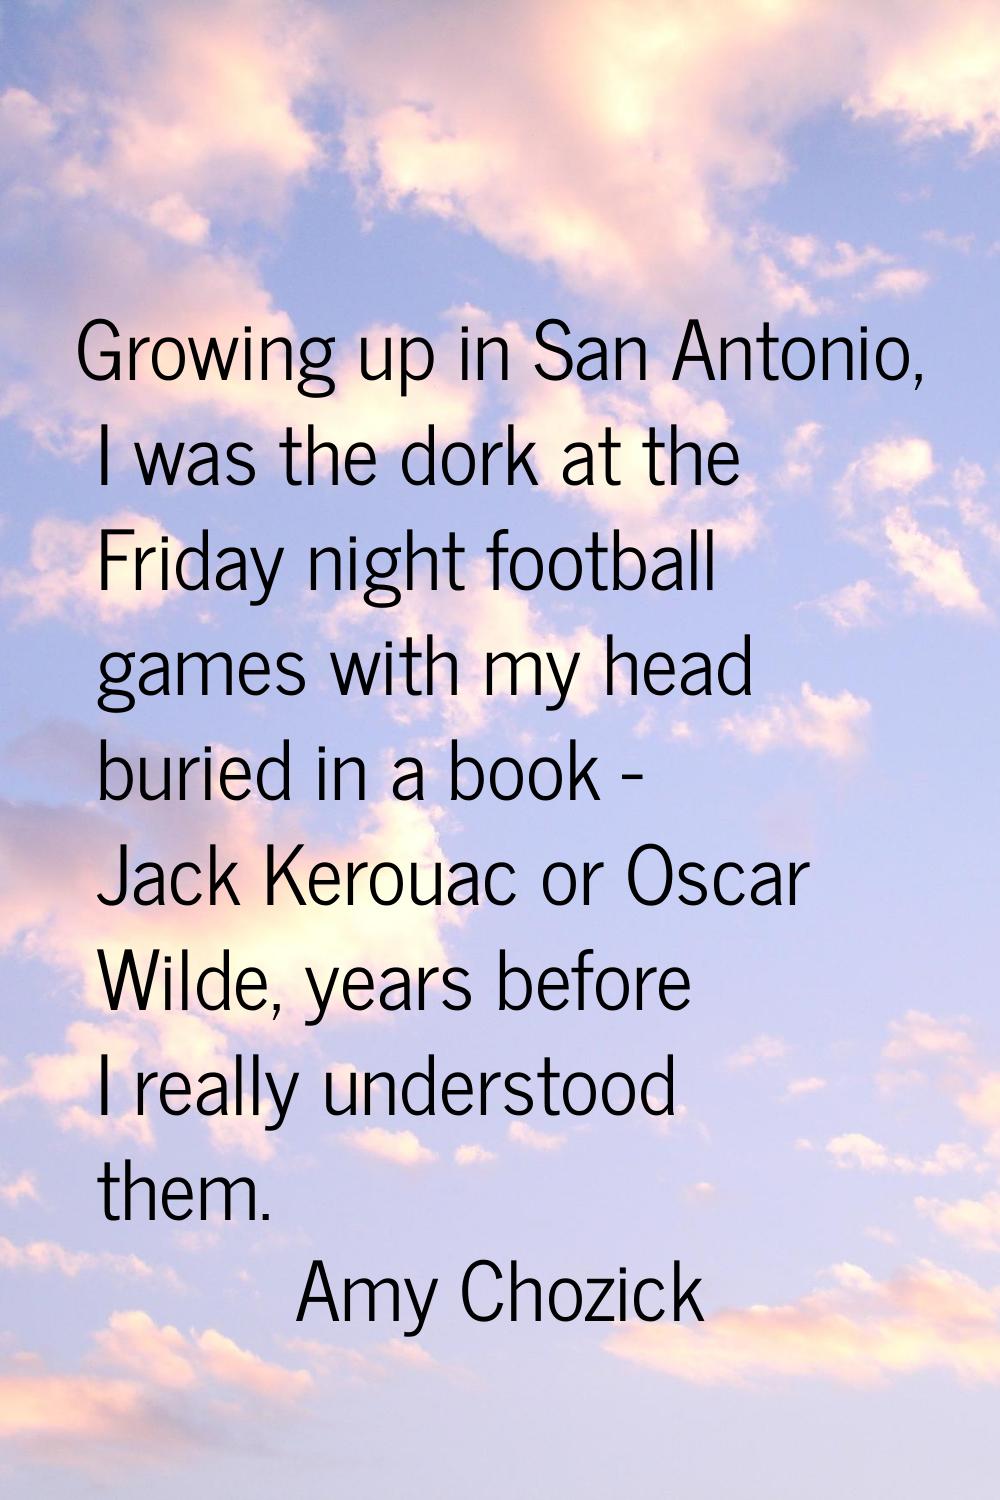 Growing up in San Antonio, I was the dork at the Friday night football games with my head buried in